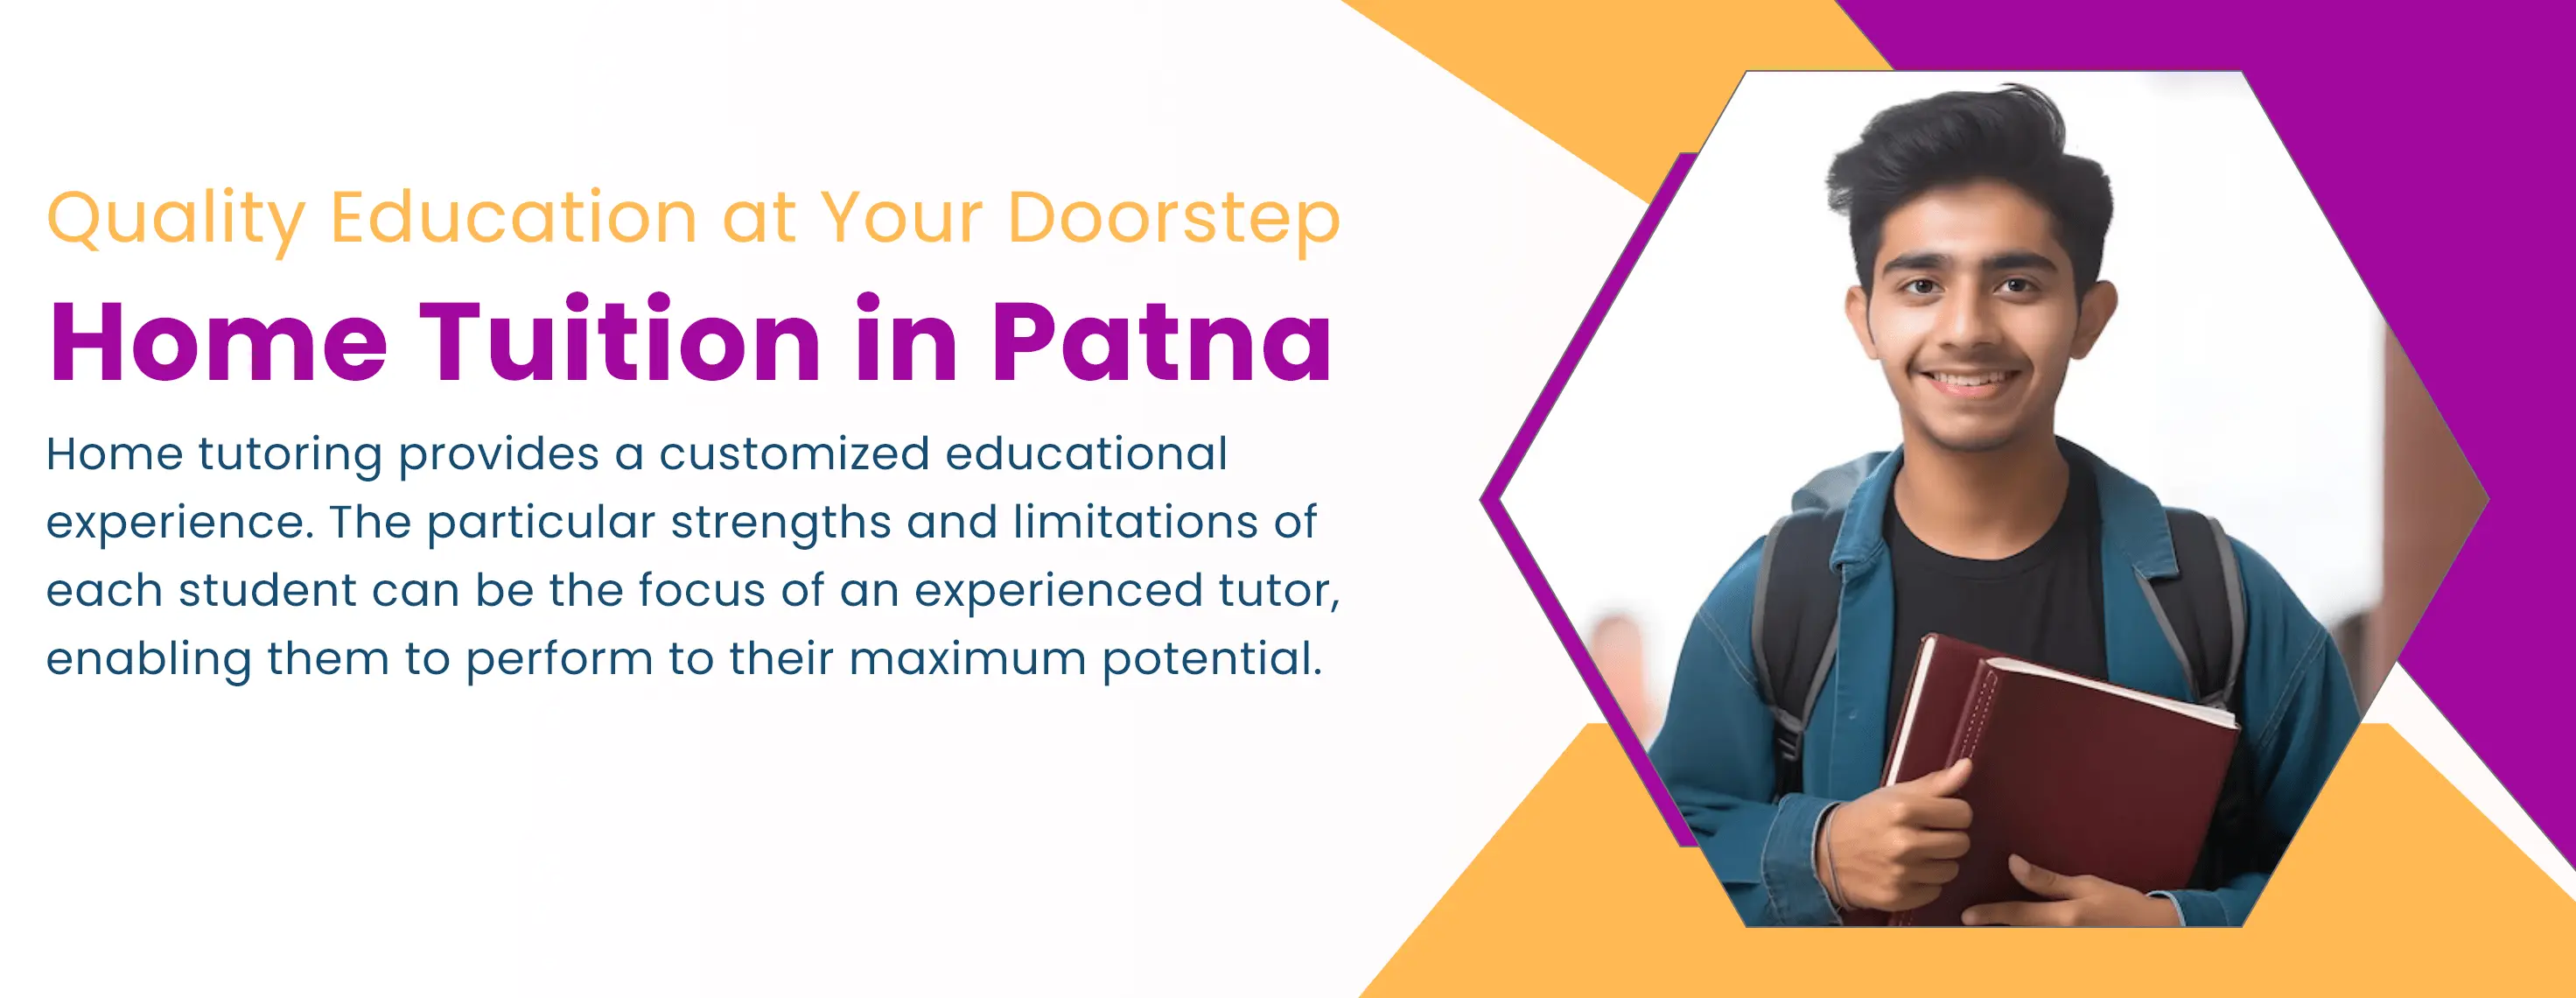 home tuition in patna image